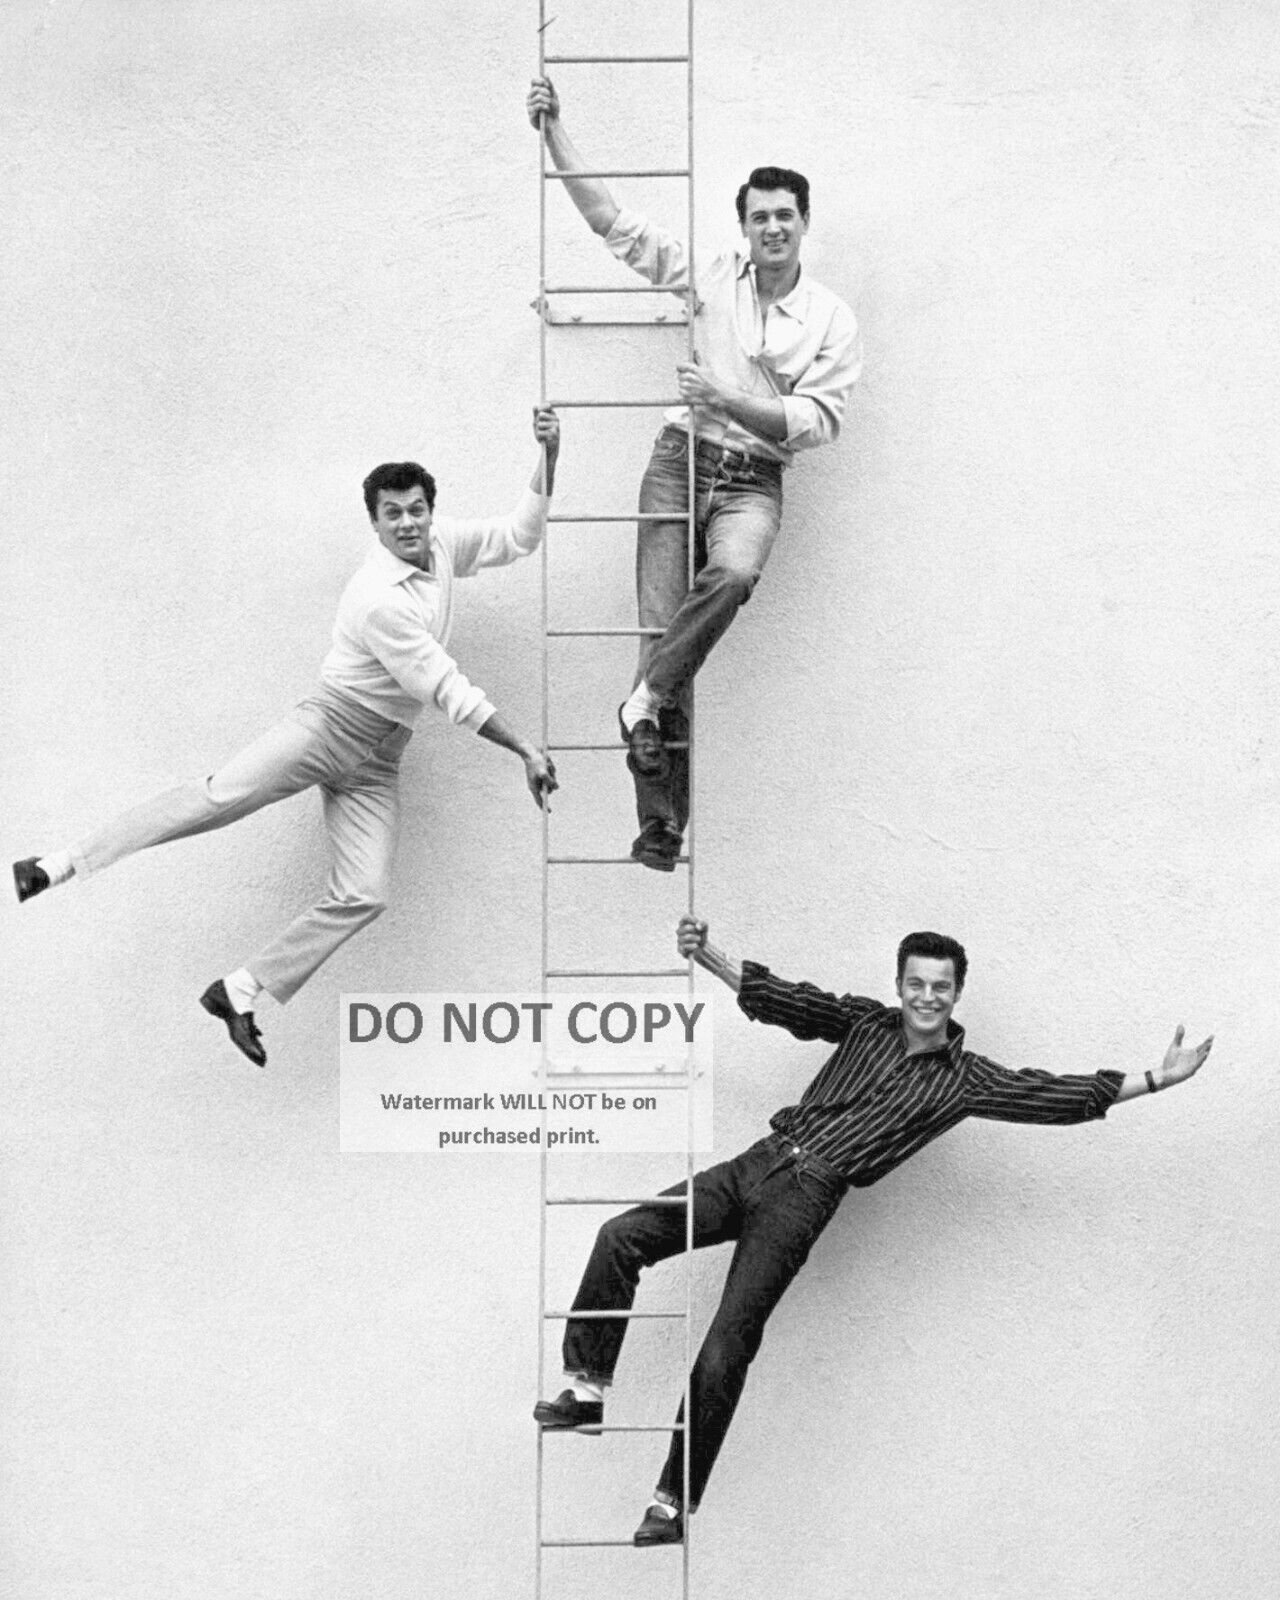 ROCK HUDSON, TONY CURTIS, ROBERT WAGNER HANGING OUT 8X10 PUBLICITY PHOTO (MW188)